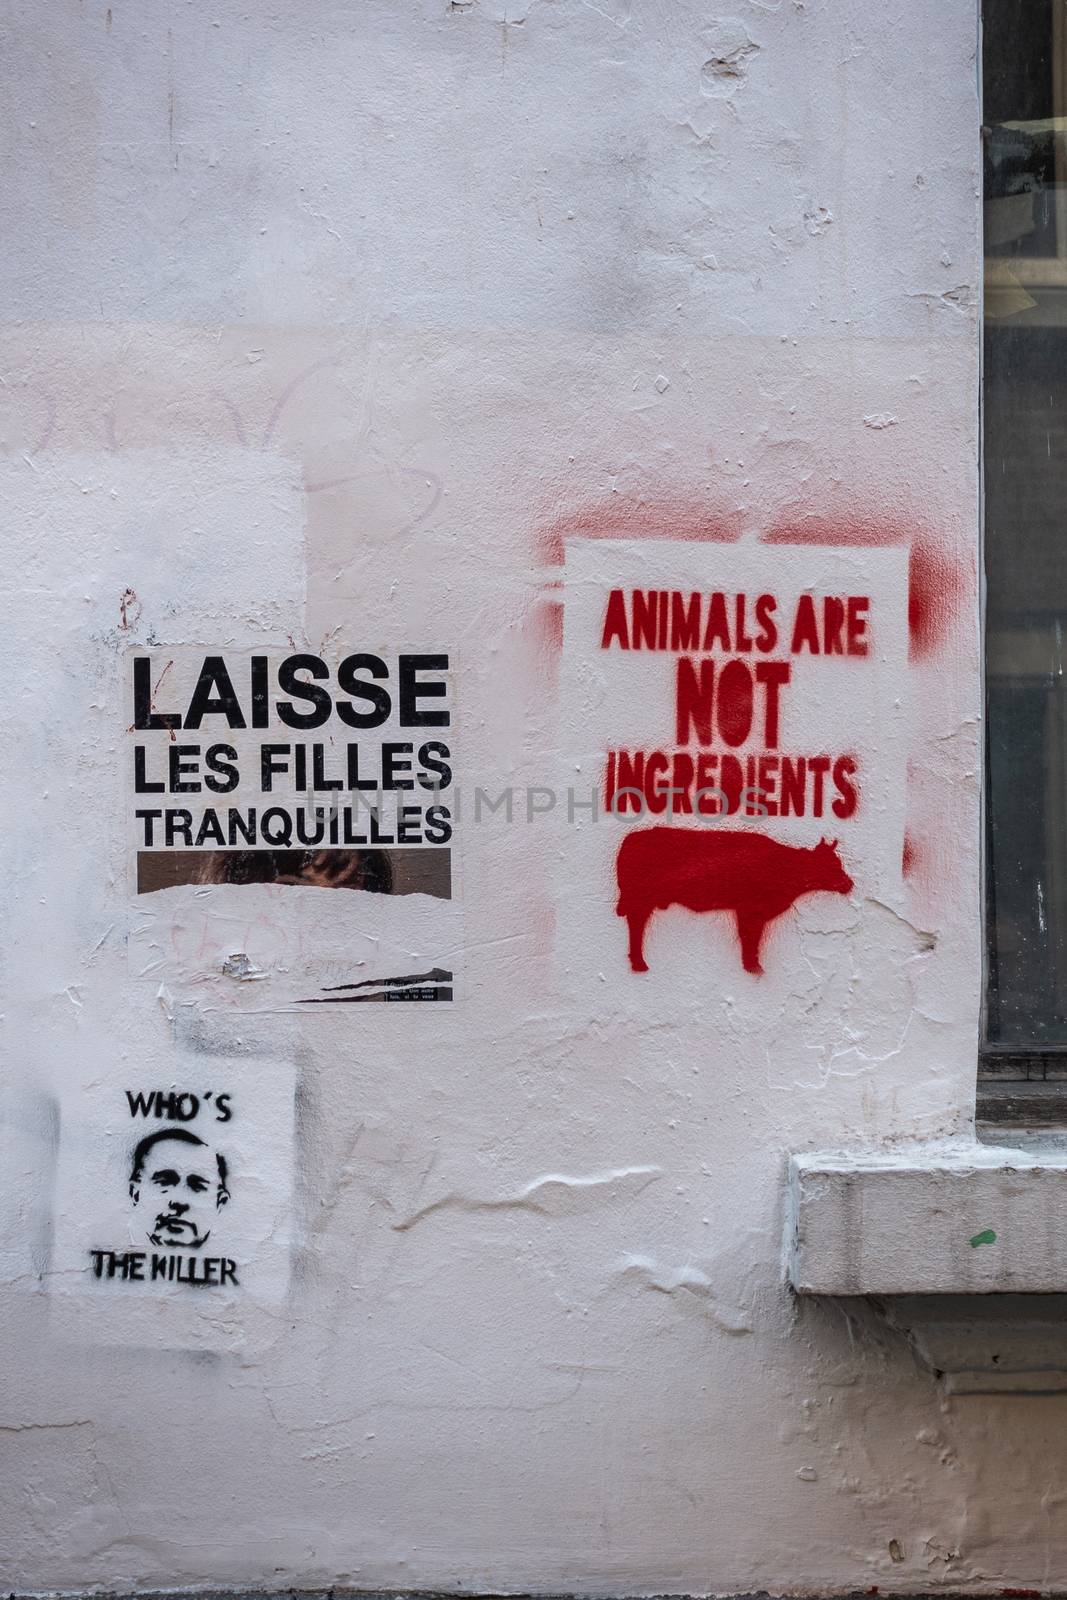 Brussels, Belgium - September 26, 2018: Black Message asks not to harass girls, and red one not to eat animals, printed and posted all over downtown. Here on white wall adjacent to window.